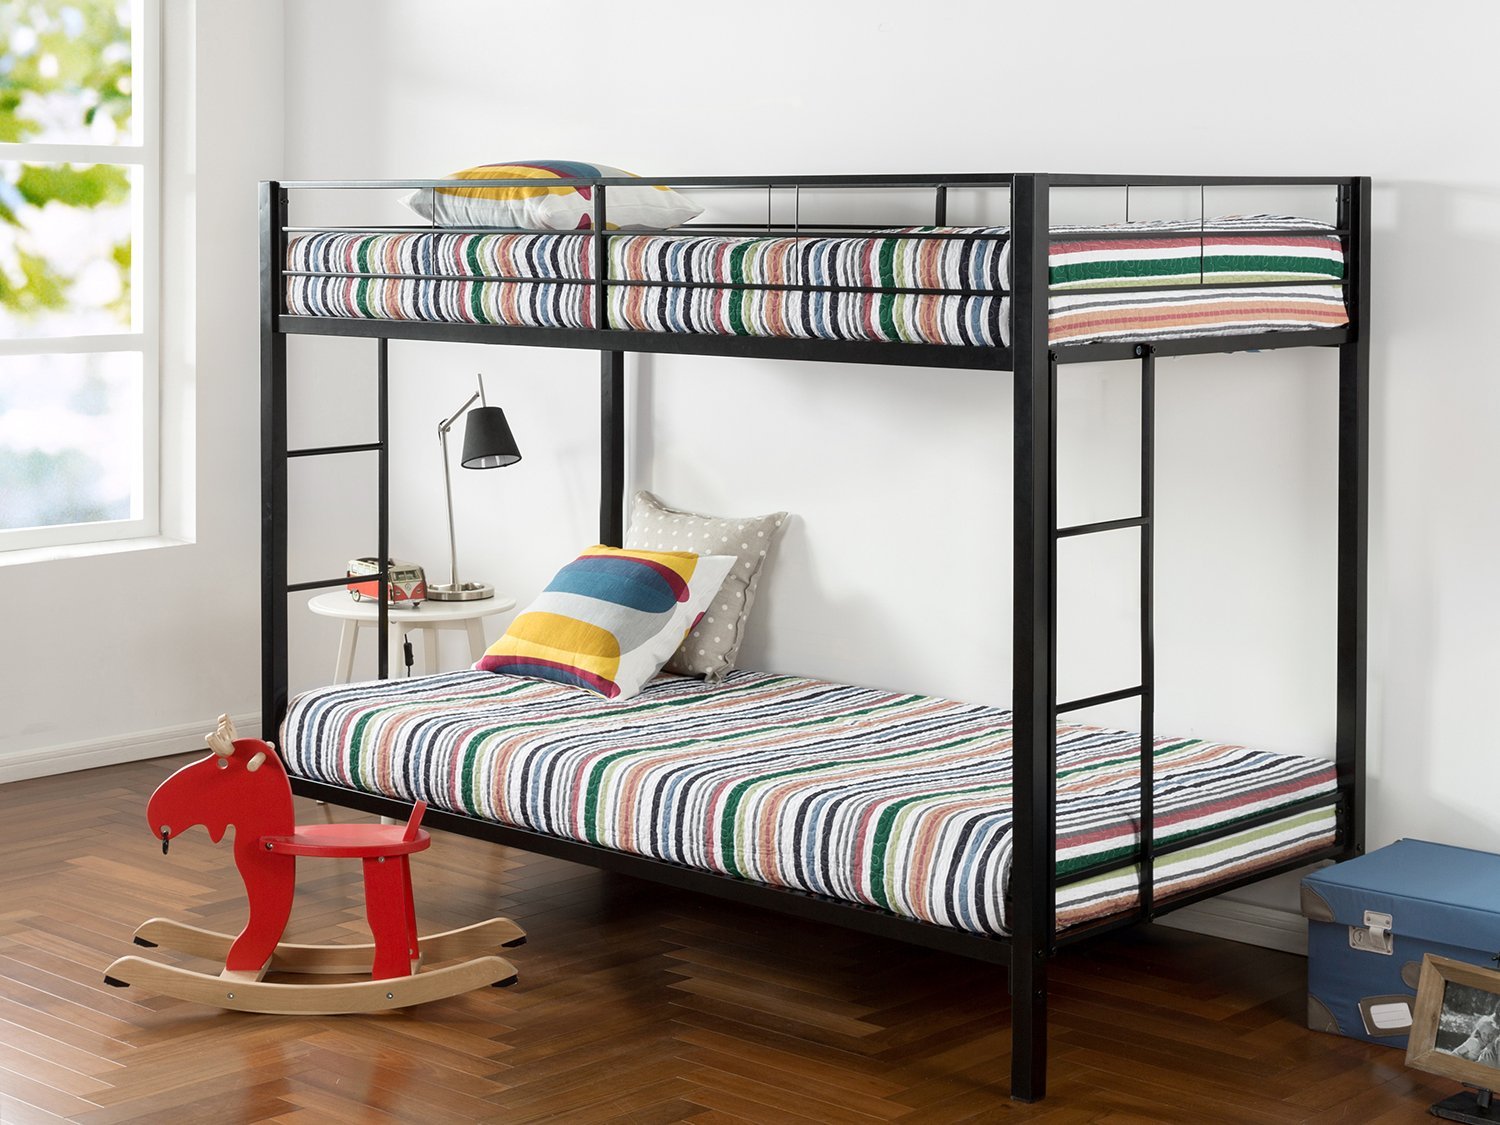 Best Bunk Beds Zinus Easy Assembly Quick Lock Twin over Twin Classic Metal Bunk Bed